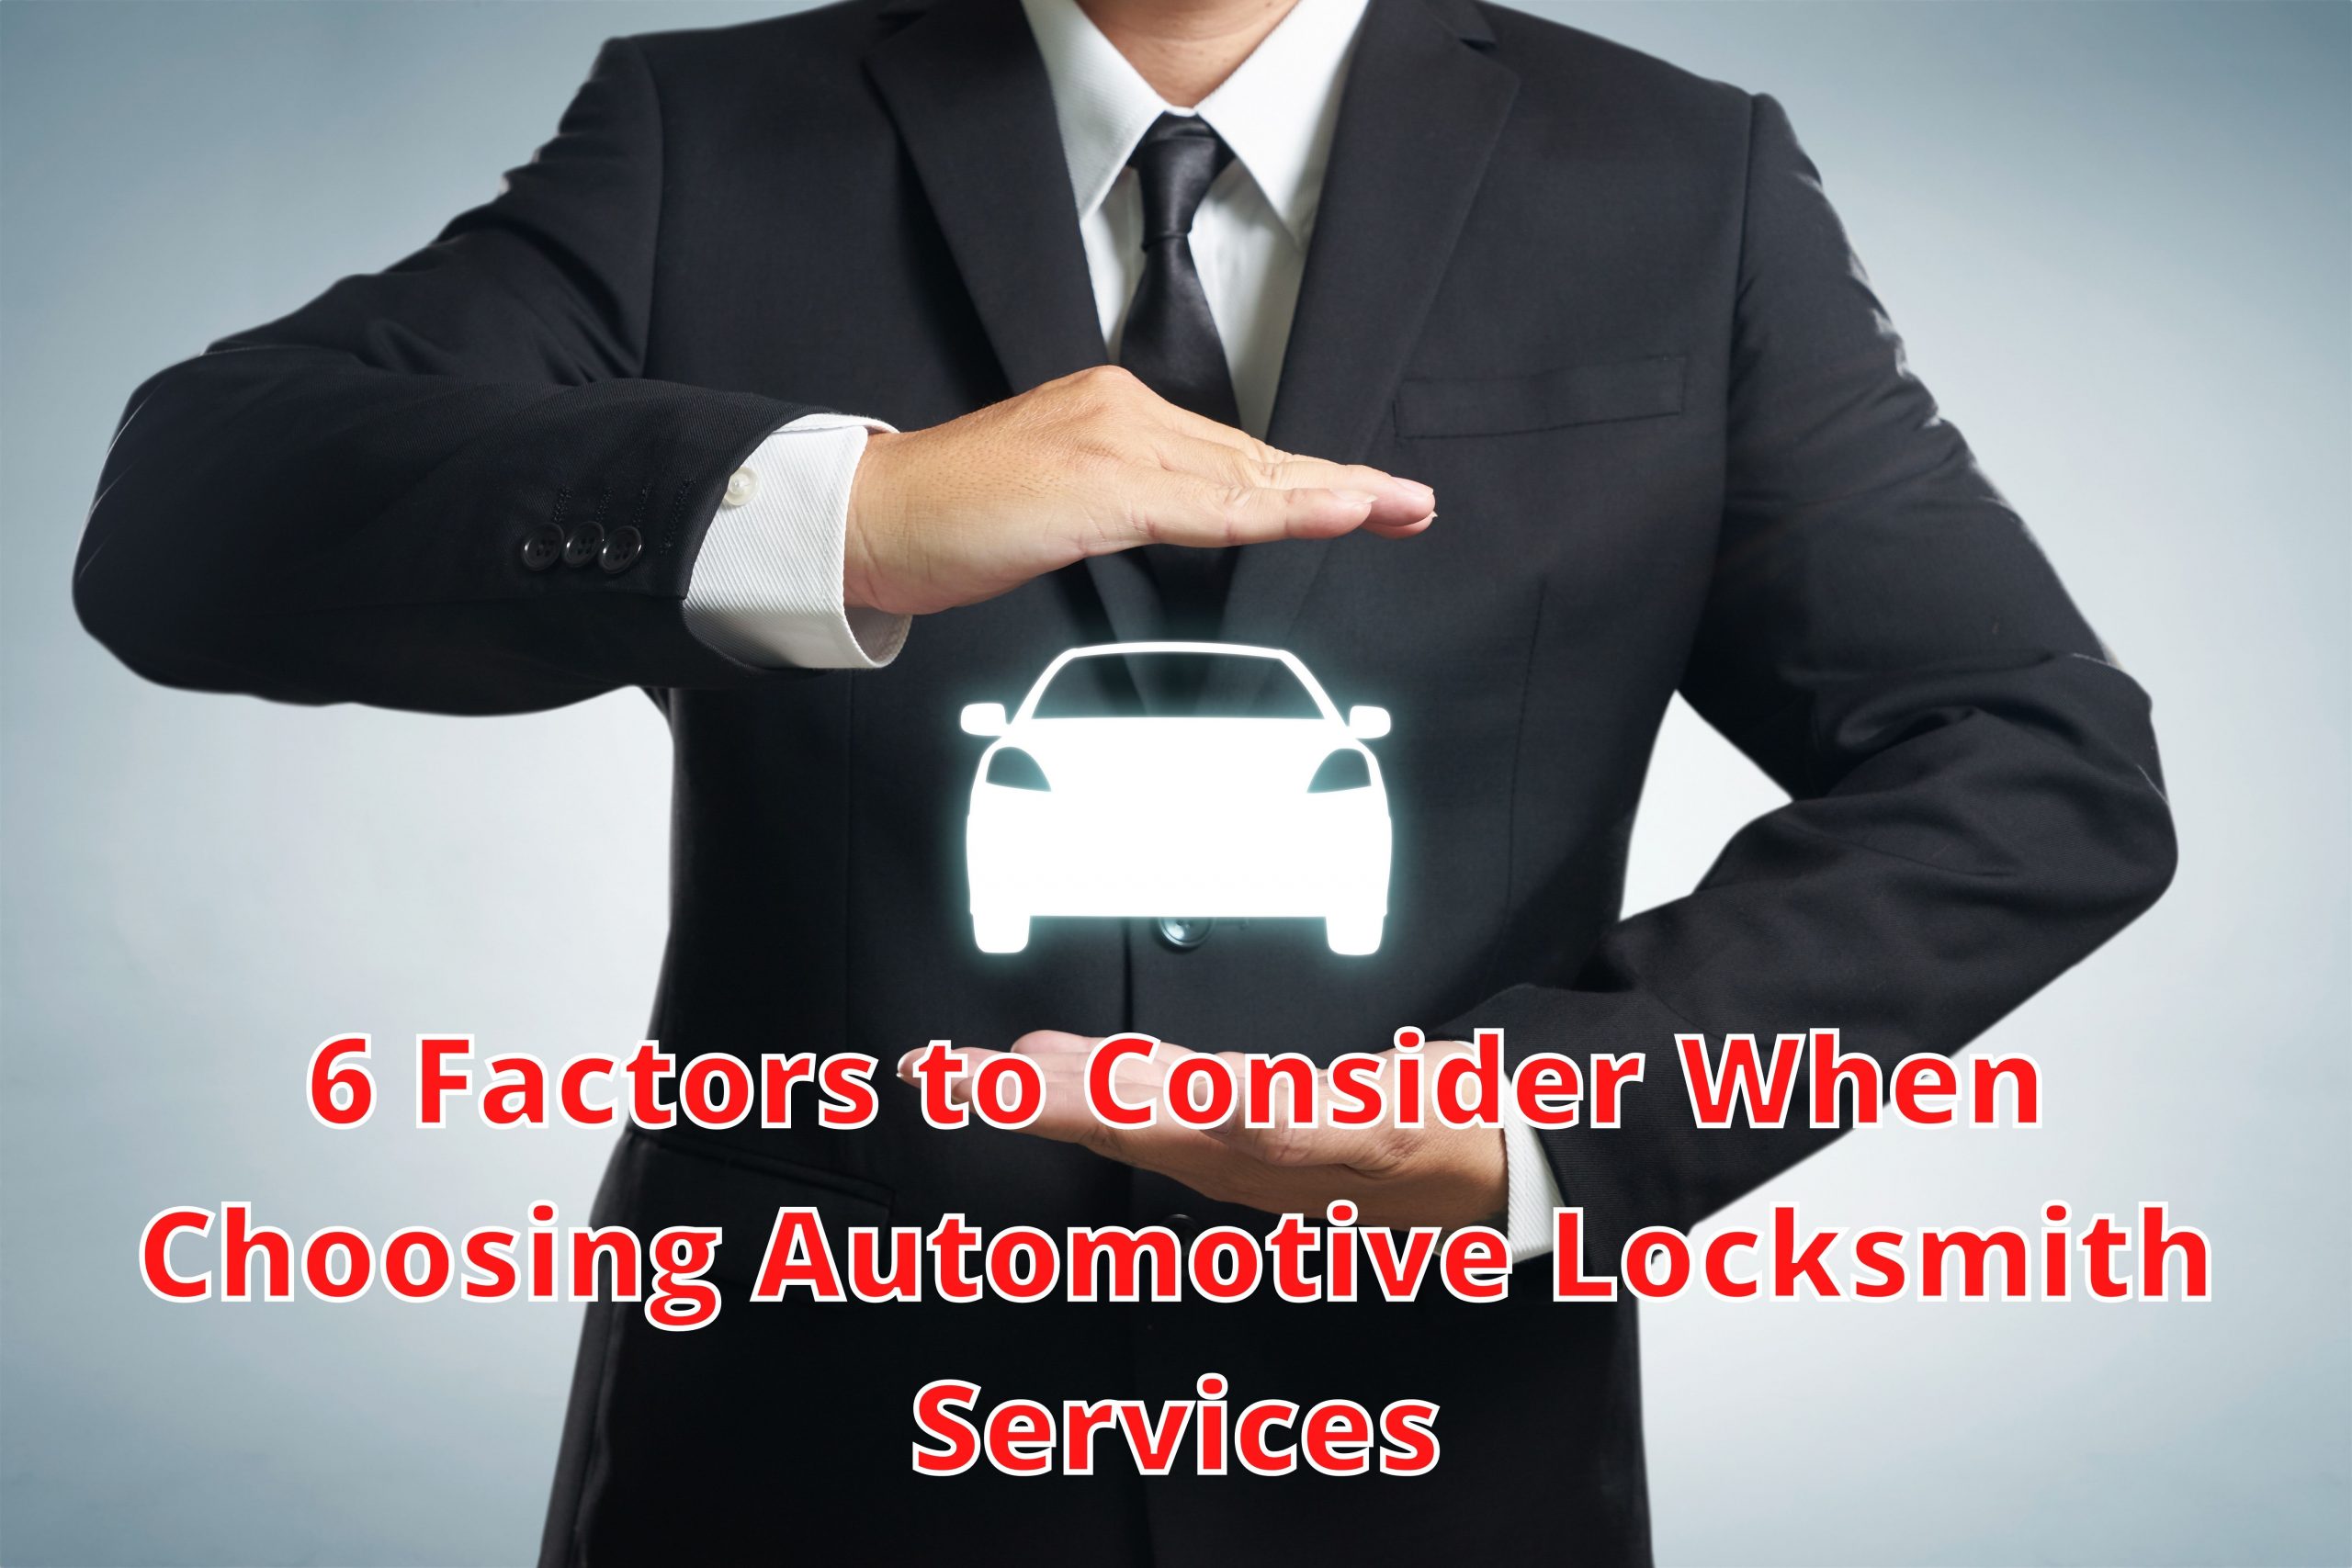 6 Factors to Consider When Choosing Automotive Locksmith Services